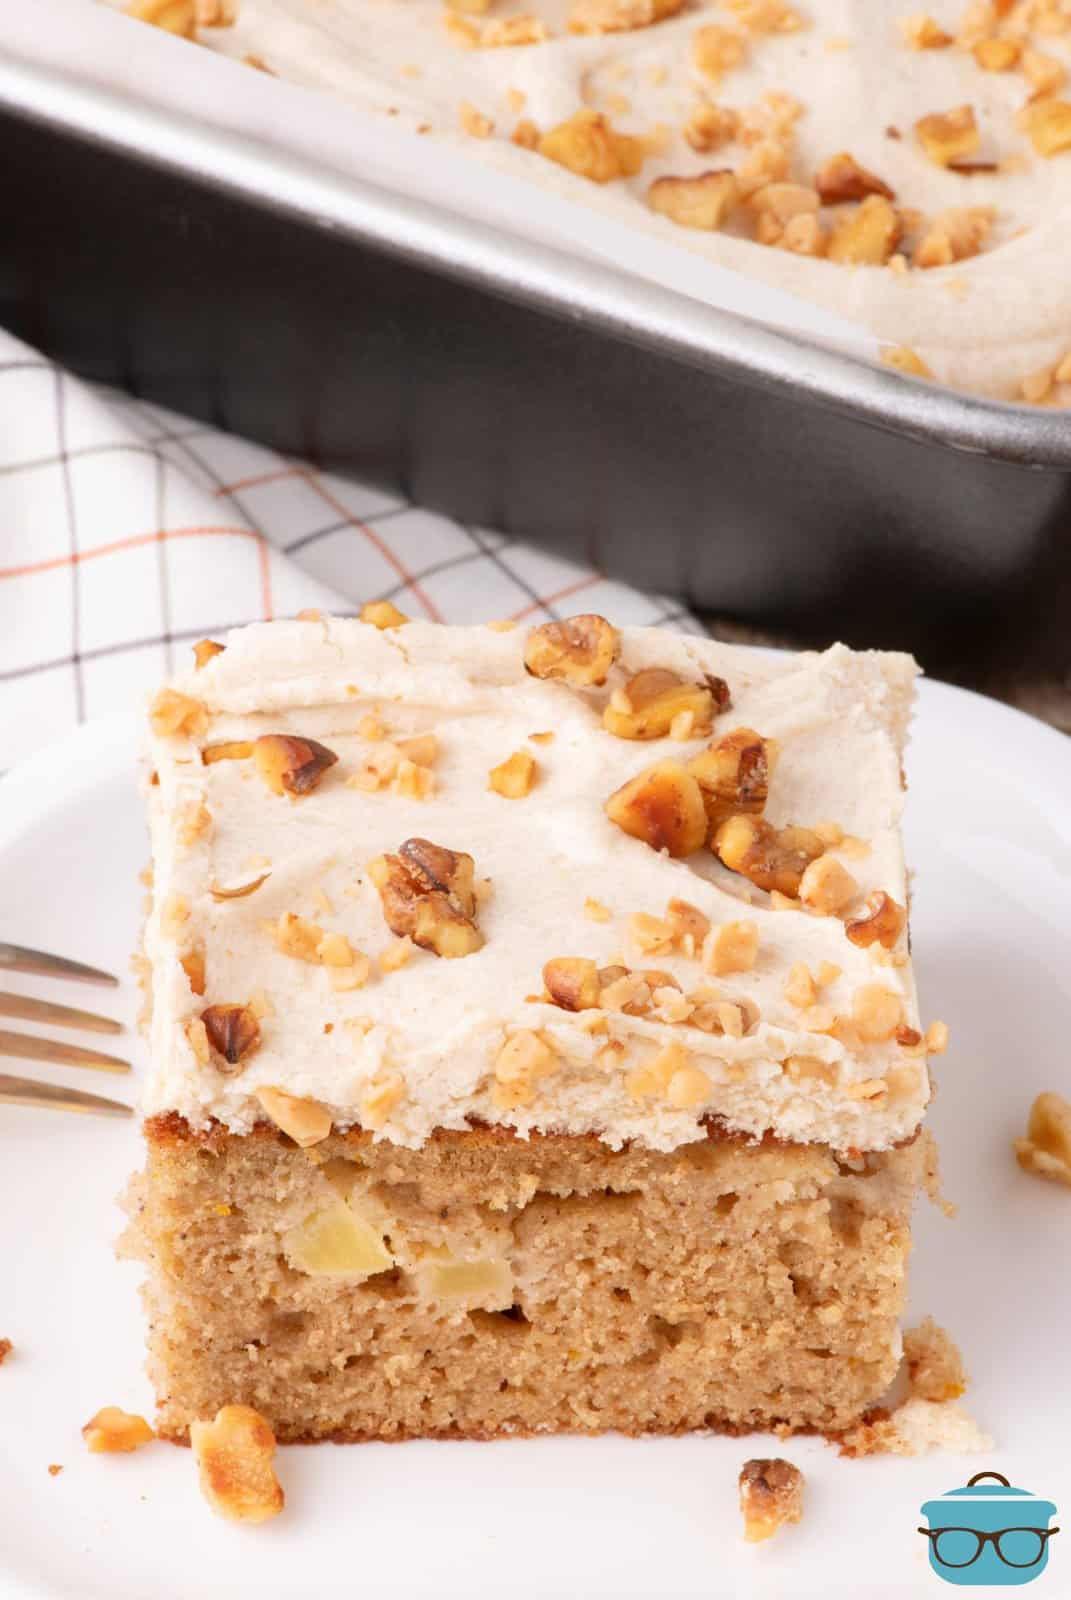 A plate with a slice of Apple Spice Cake with Brown Sugar frosting and fork beside it.